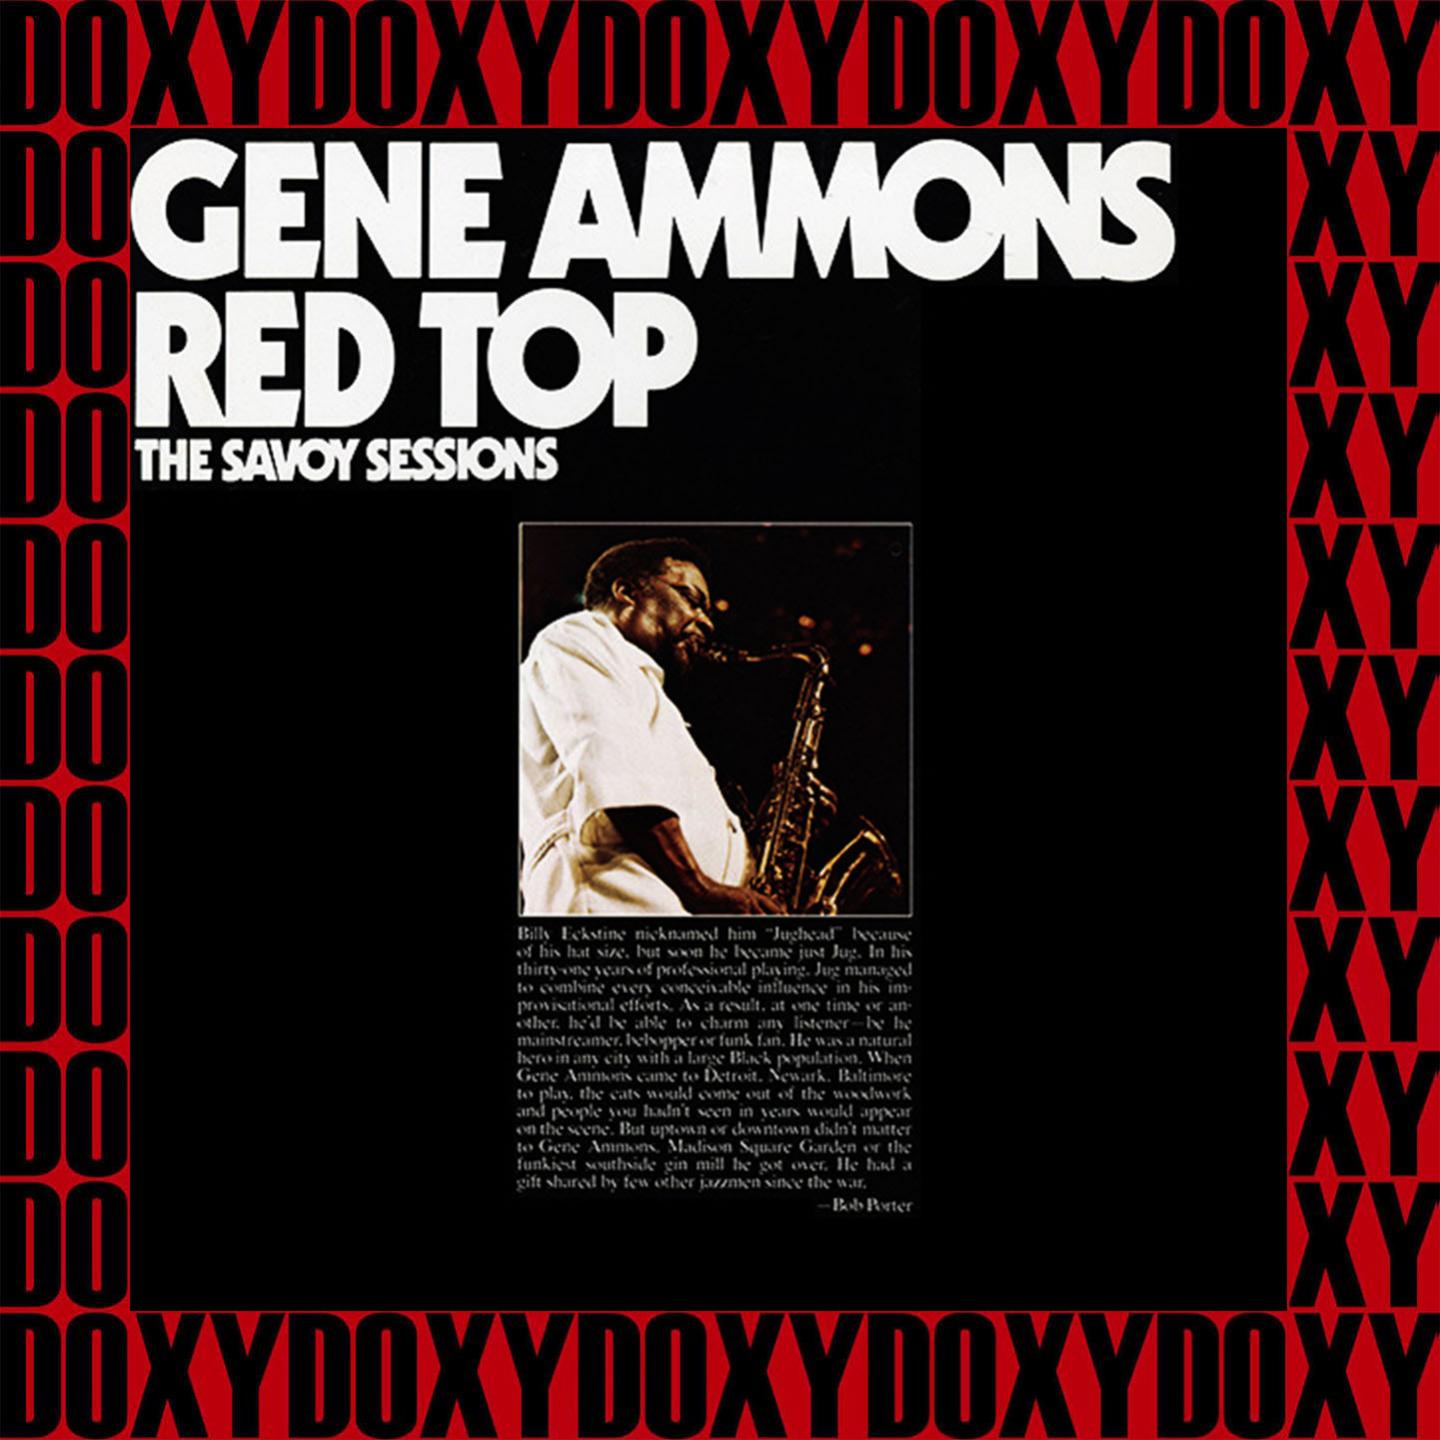 Red Top, The Savoy Sessions (Remastered Version) (Doxy Collection)